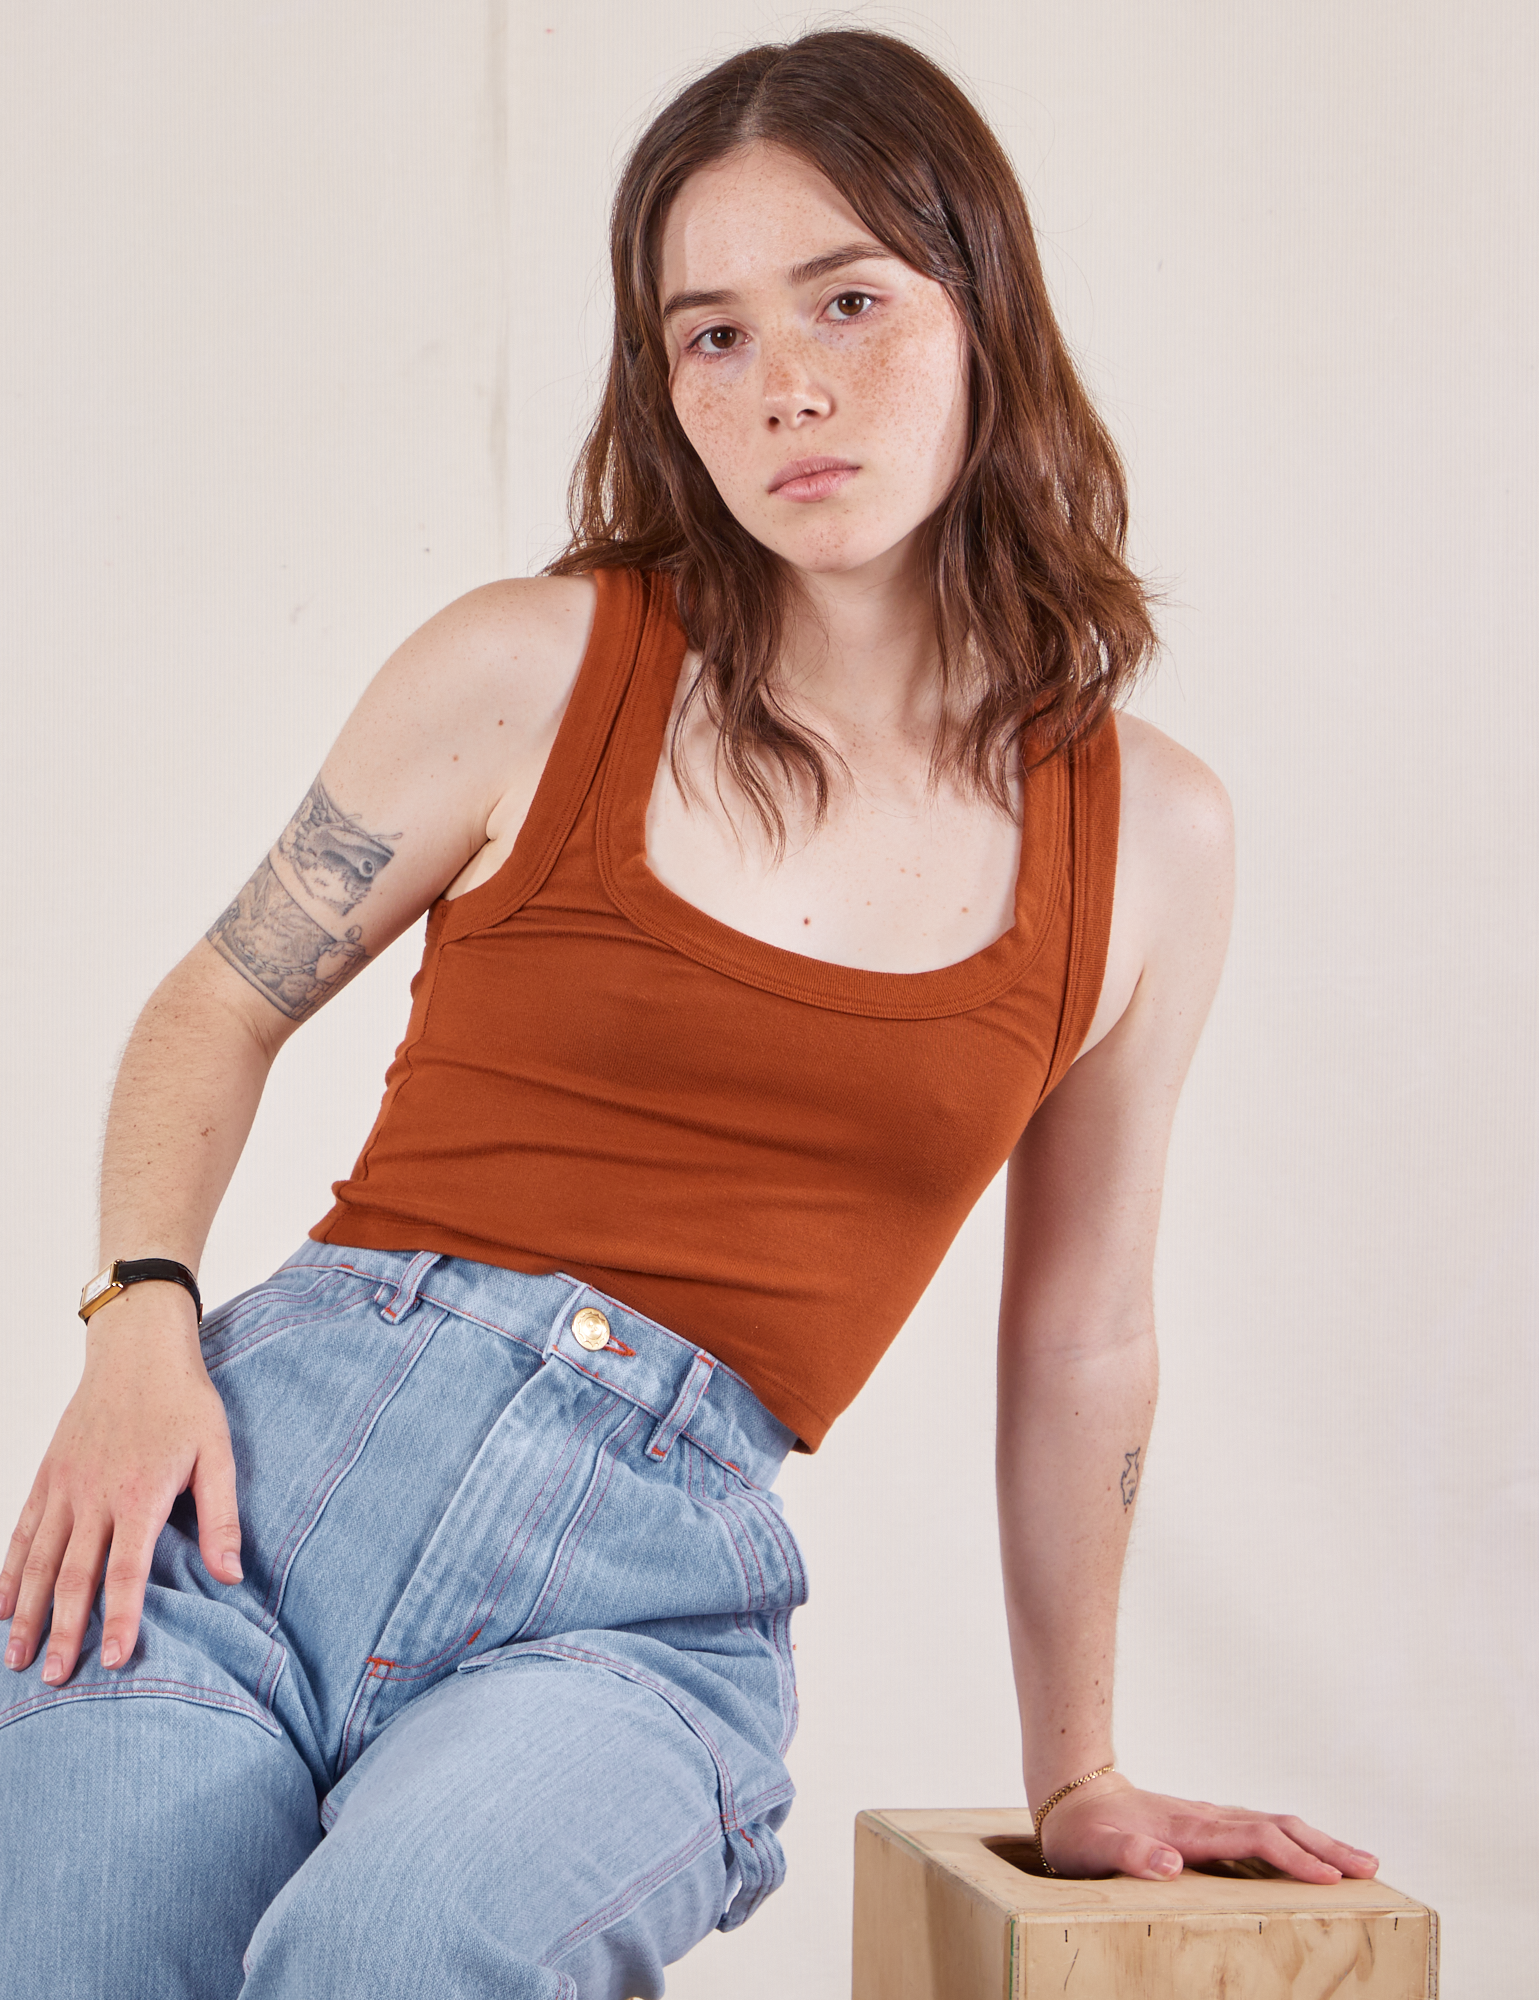 Hana is wearing Cropped Tank Top in Burnt Terracotta and light wash Carpenter Jeans